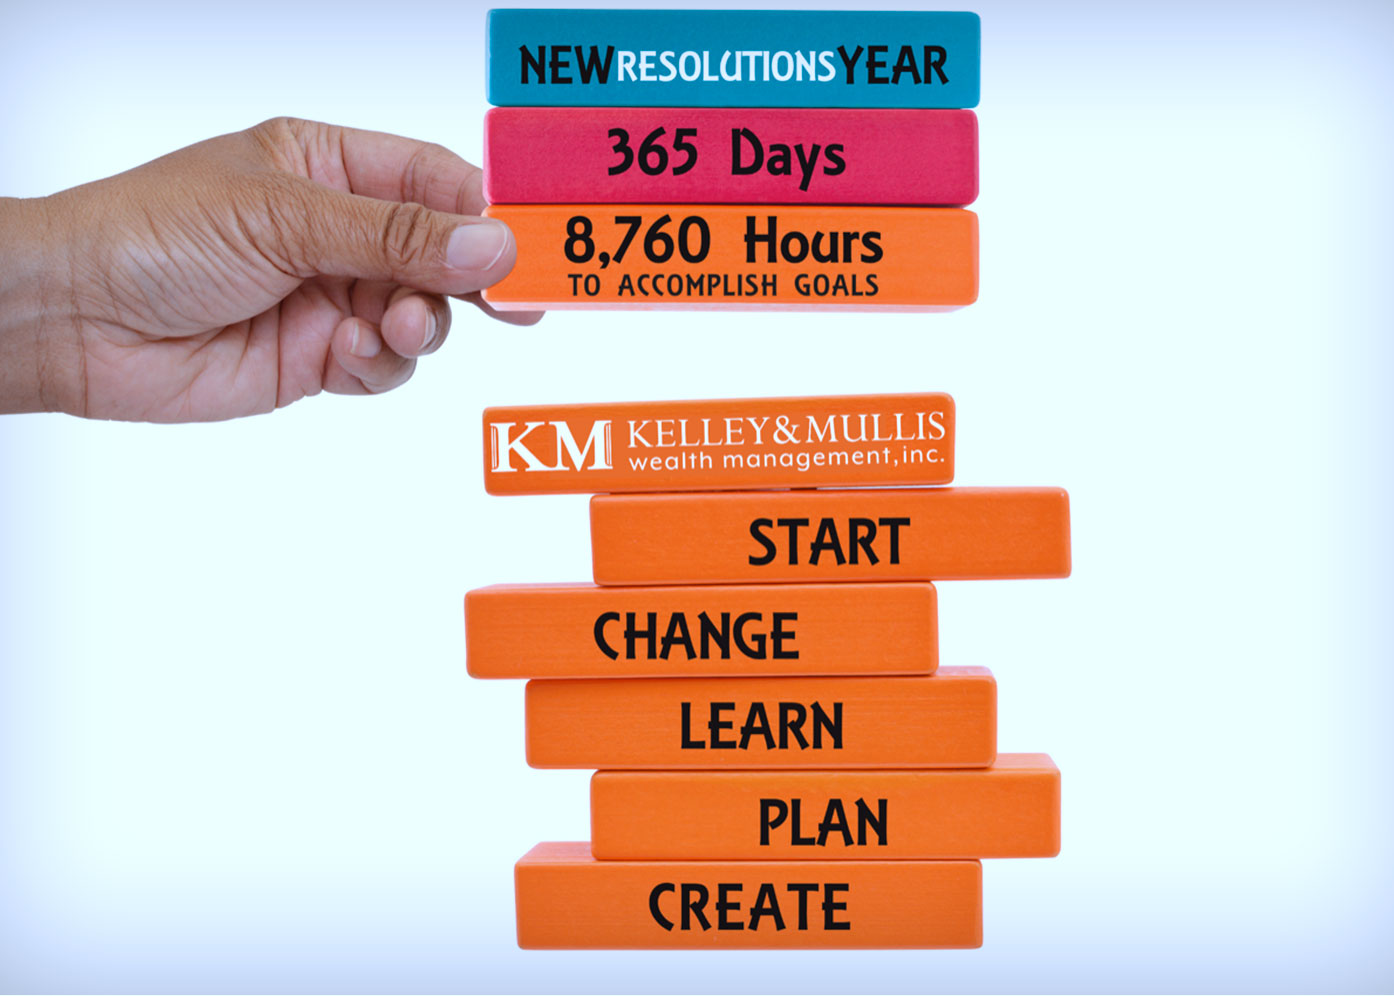 New Resolutions 365 Days, 8760 Hours, Start Change Learn Plan Create